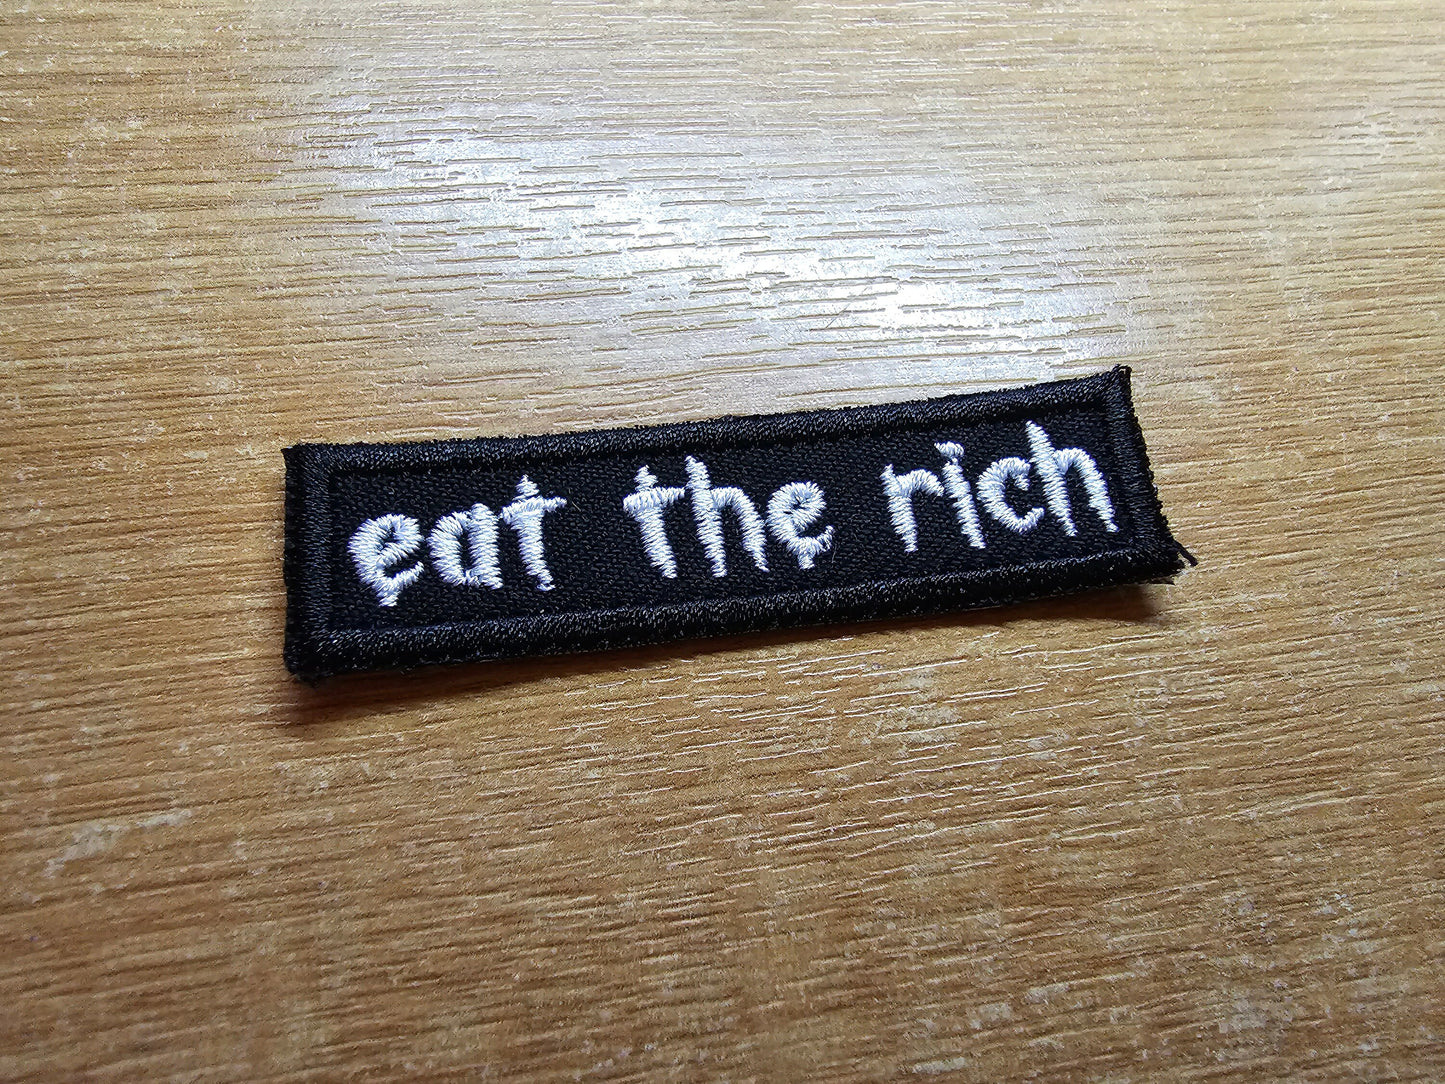 Eat The Rich MINI Embroidered Iron On Patch Politics Punk and Goth - Very small! White and Black